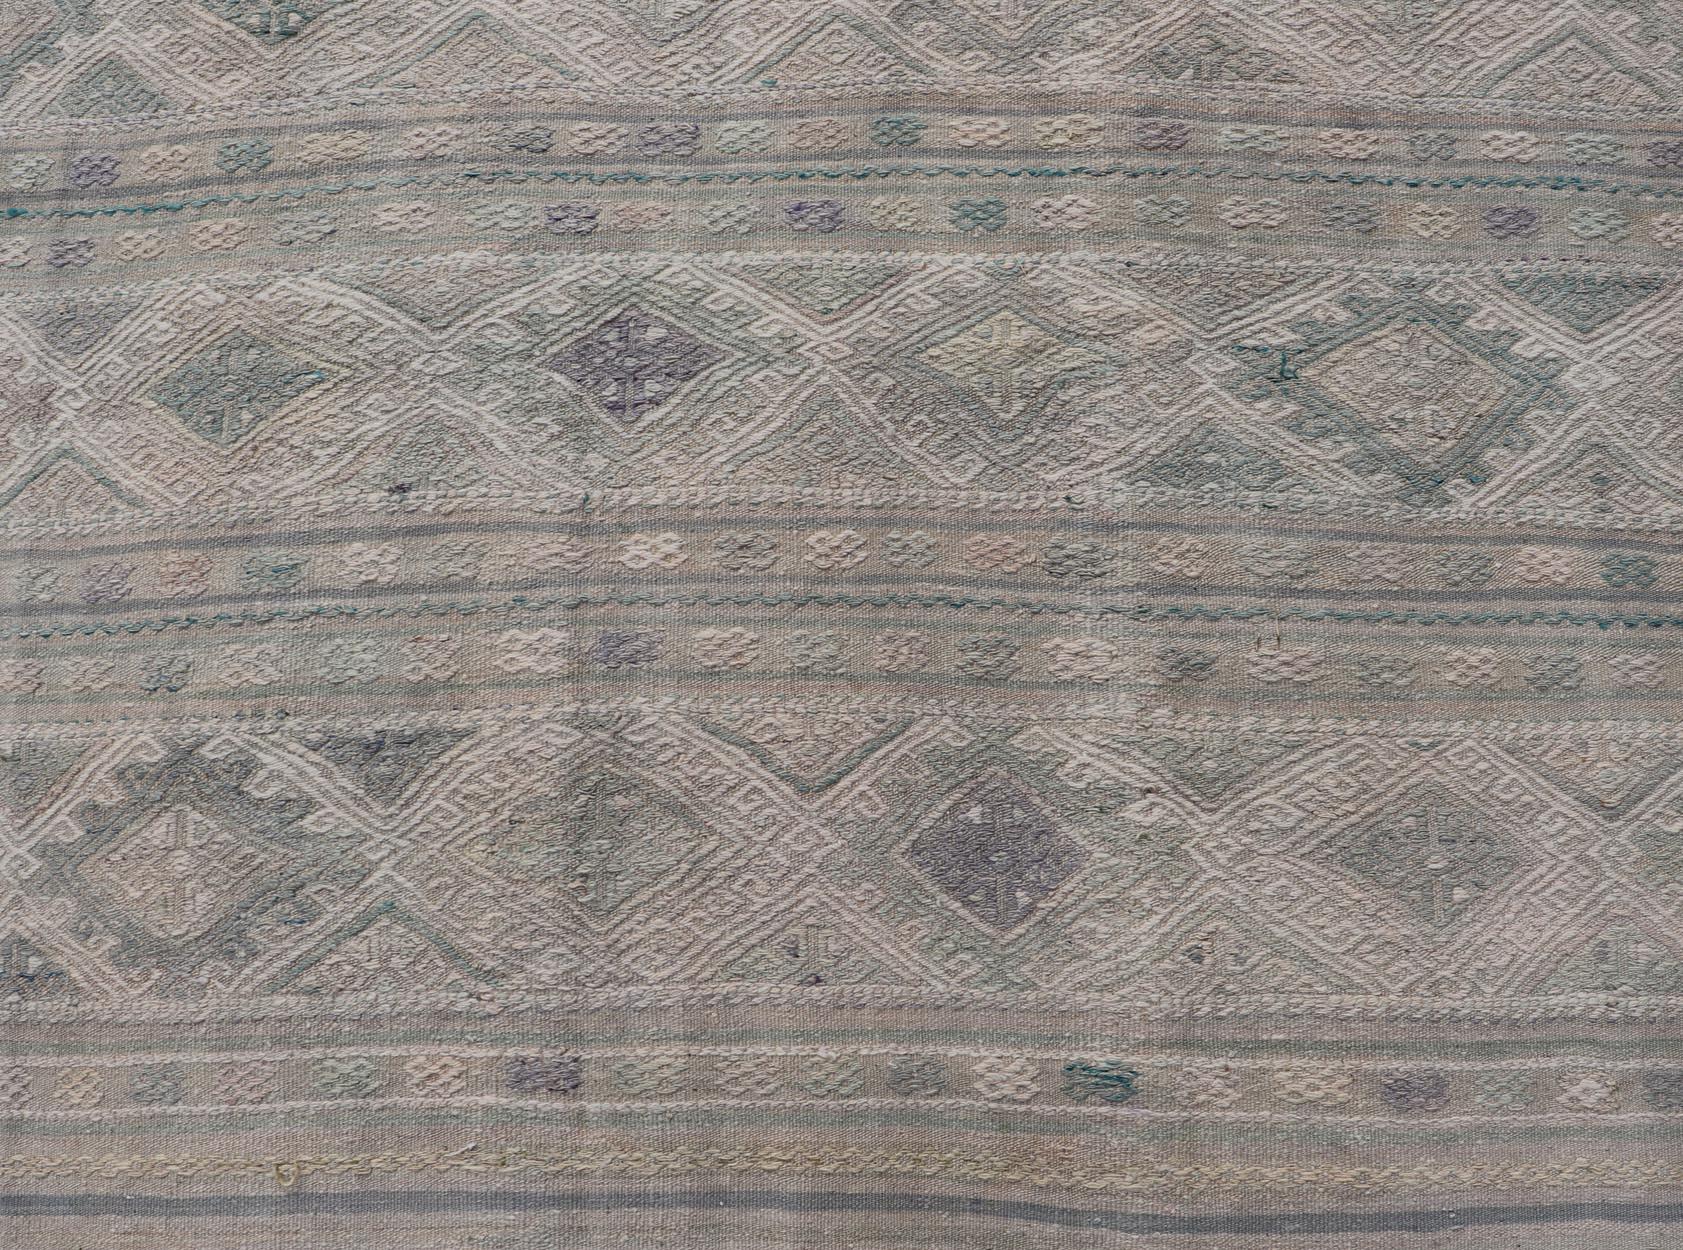 Vintage Turkish Flat-Weave Kilim with Stripes and Embroideries With Gray-Green For Sale 2